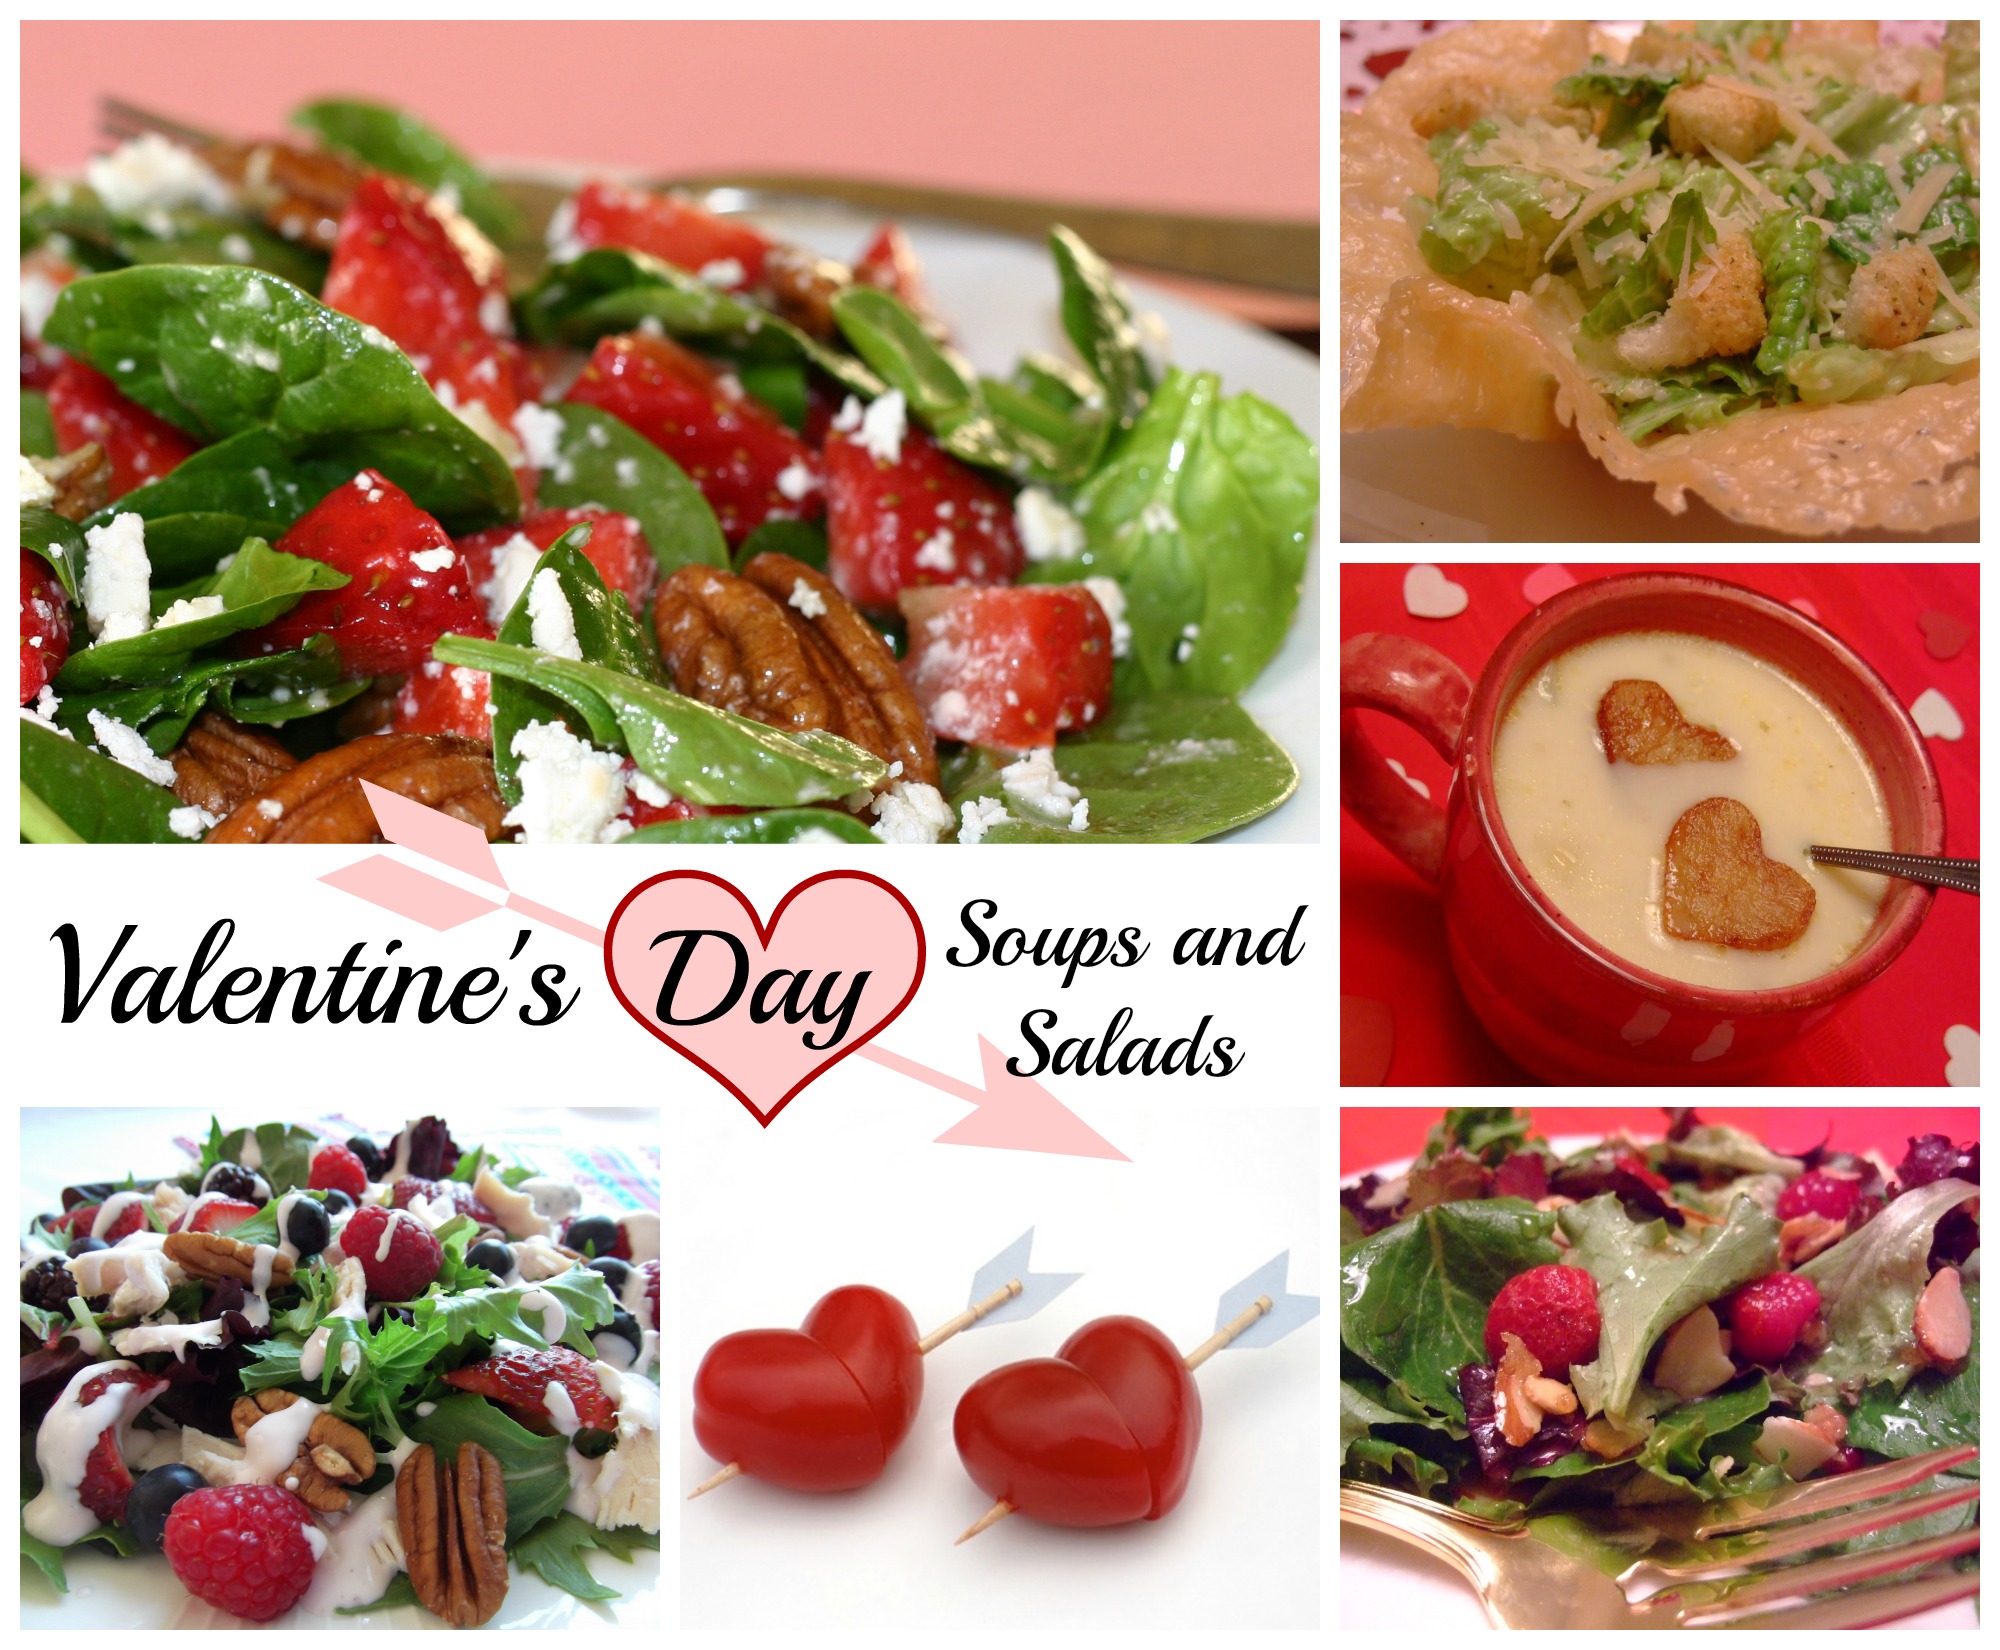 Valentine's Day Soup and Salad Ideas